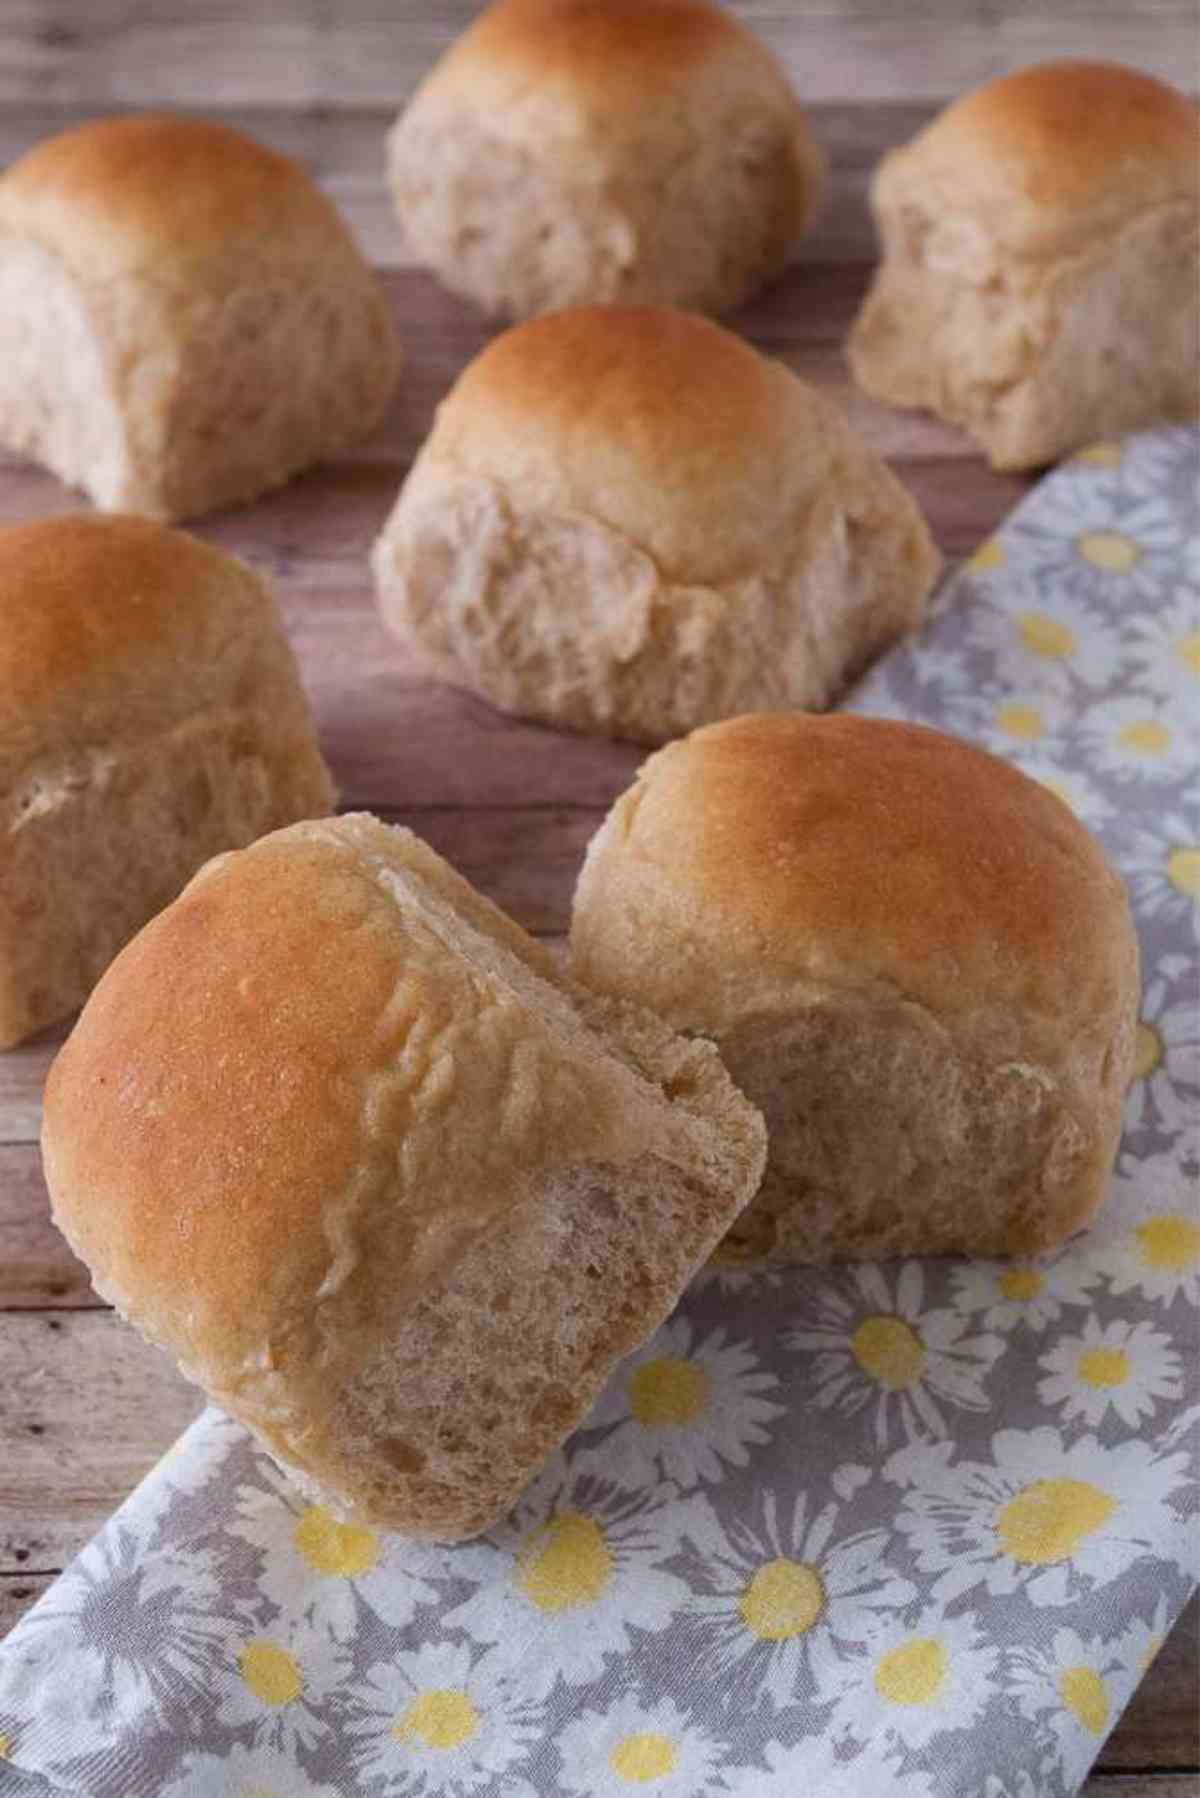 Fresh whole wheat dinner rolls ready to eat.